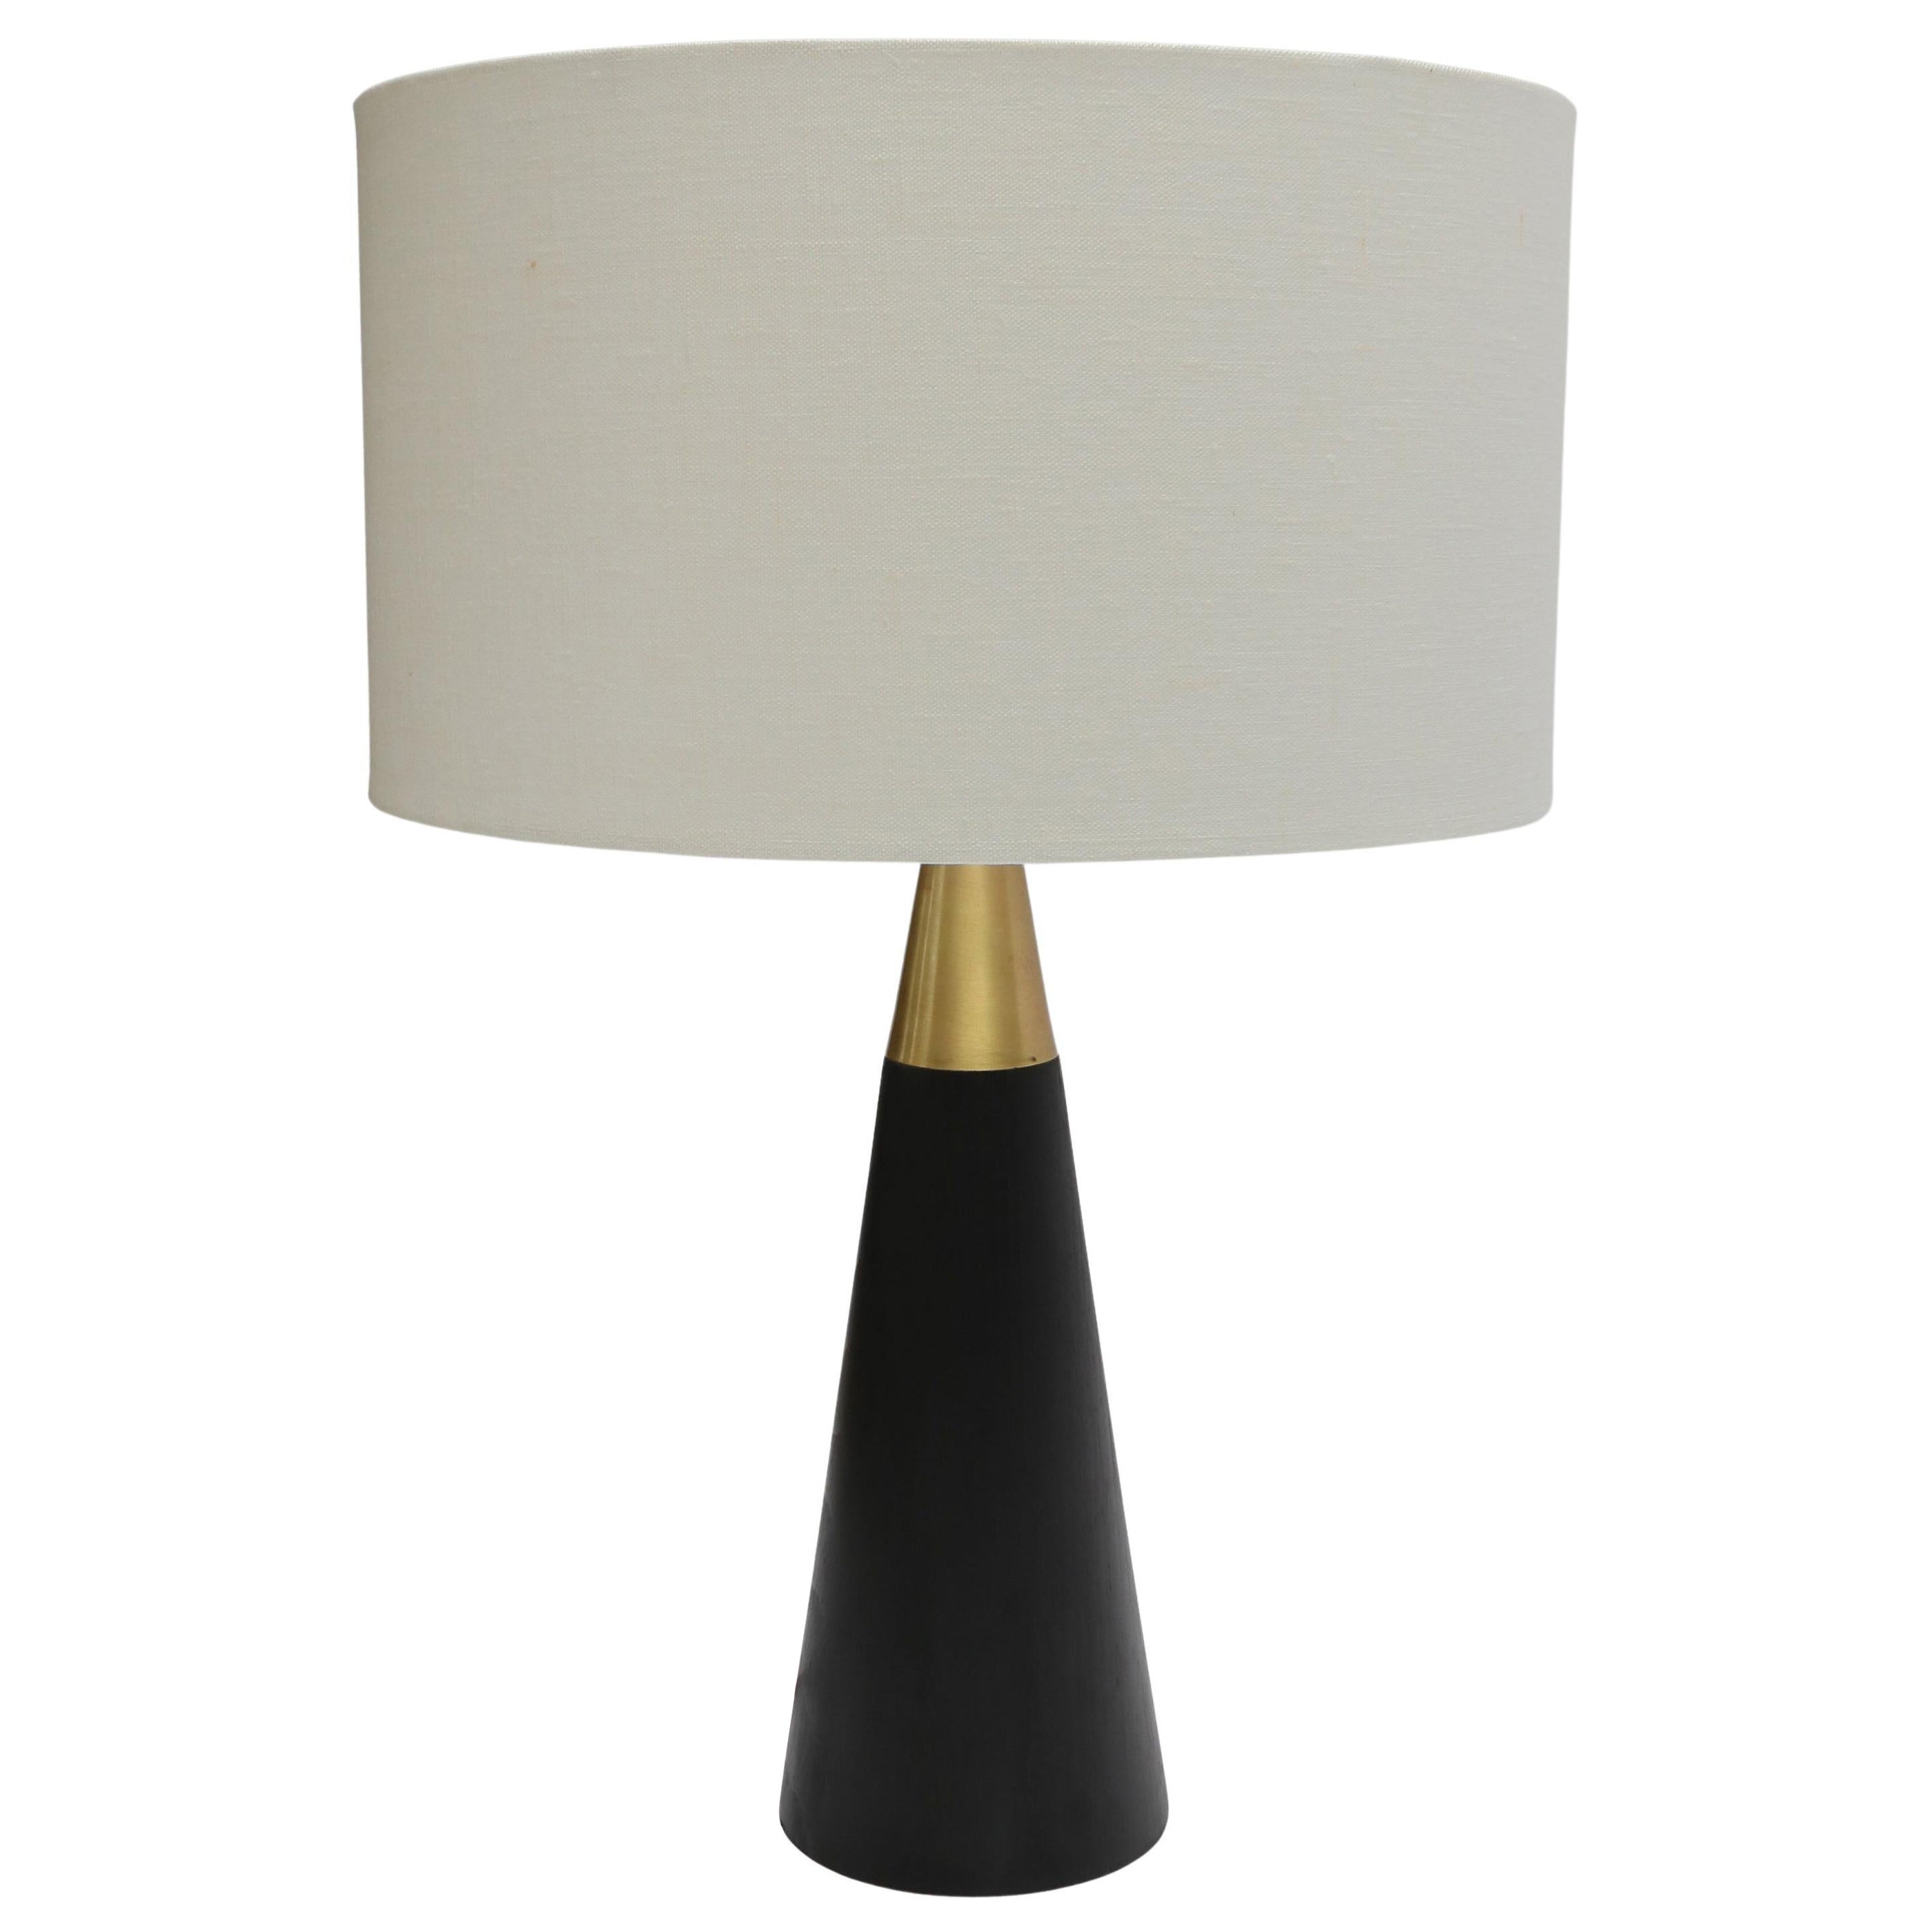 Custom Brass and Black Table Lamp with Ivory Linen Shade by Adesso Imports For Sale